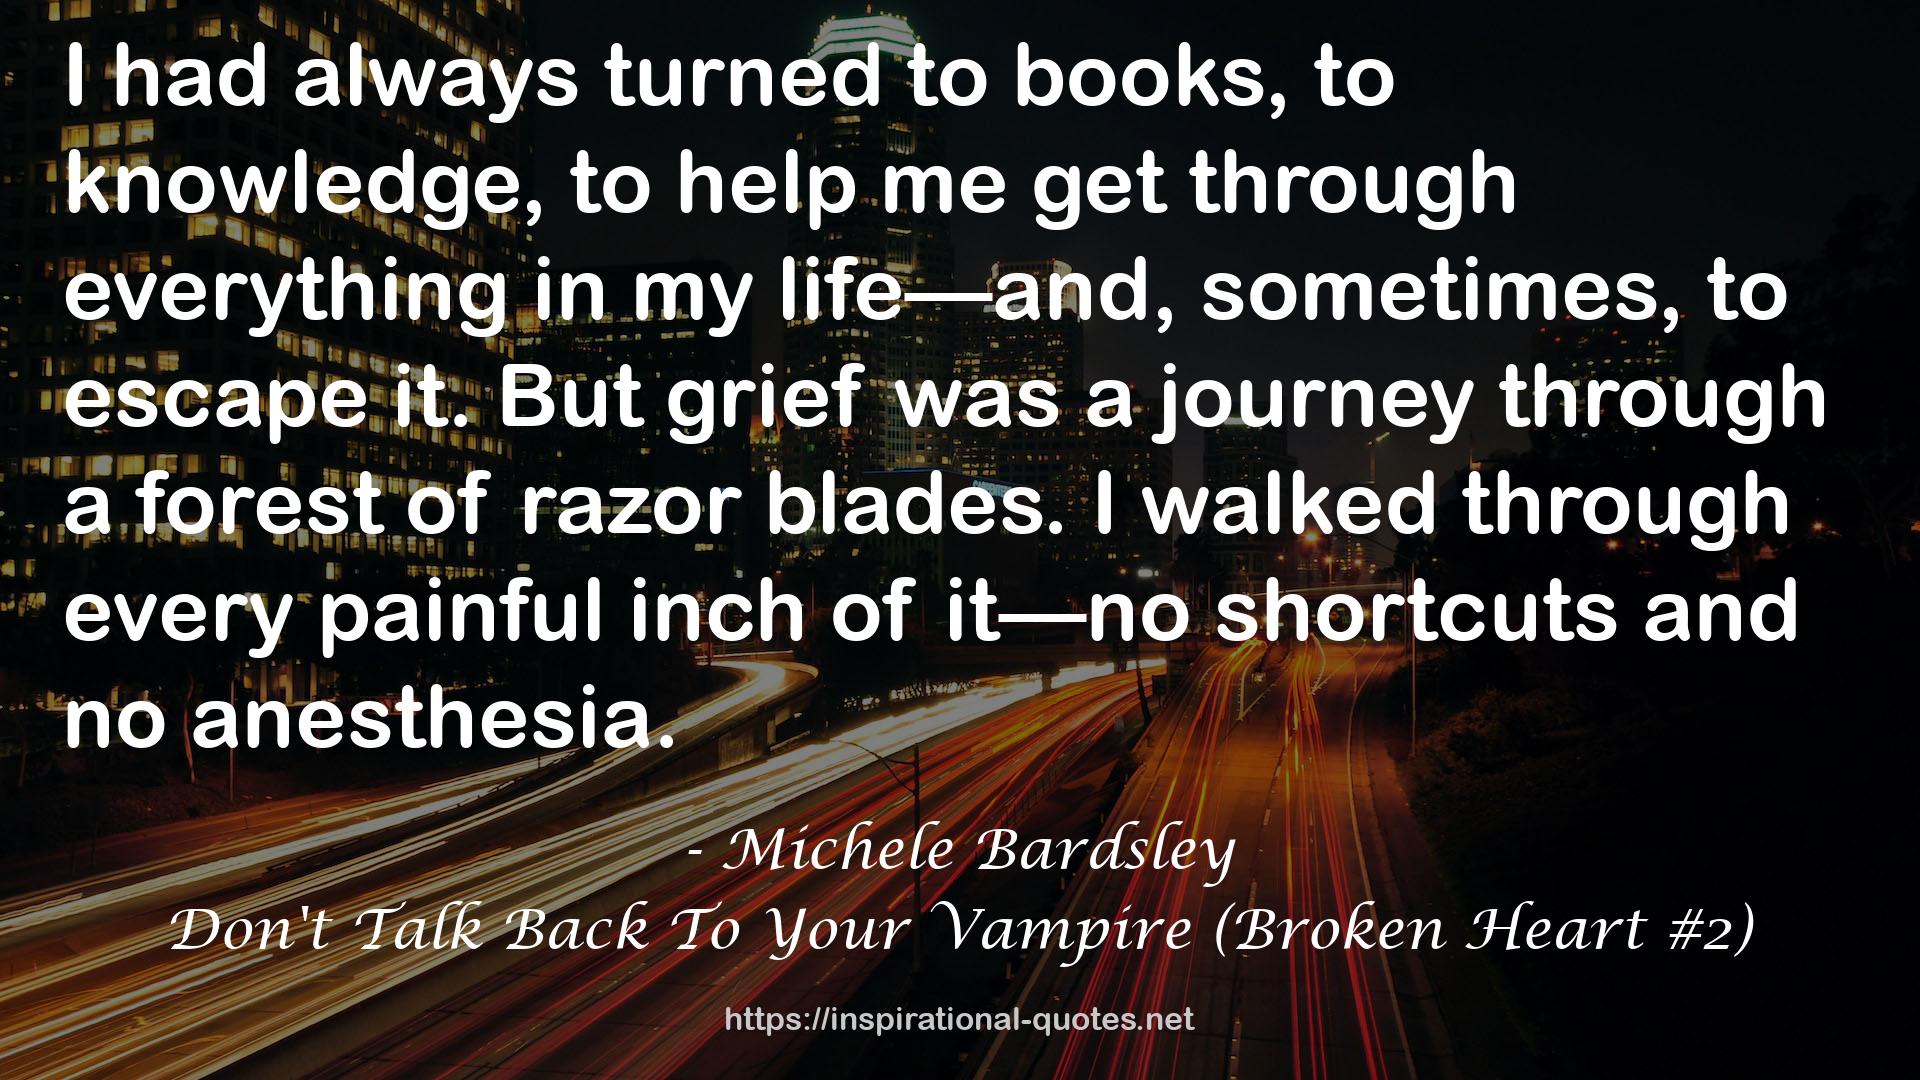 Don't Talk Back To Your Vampire (Broken Heart #2) QUOTES